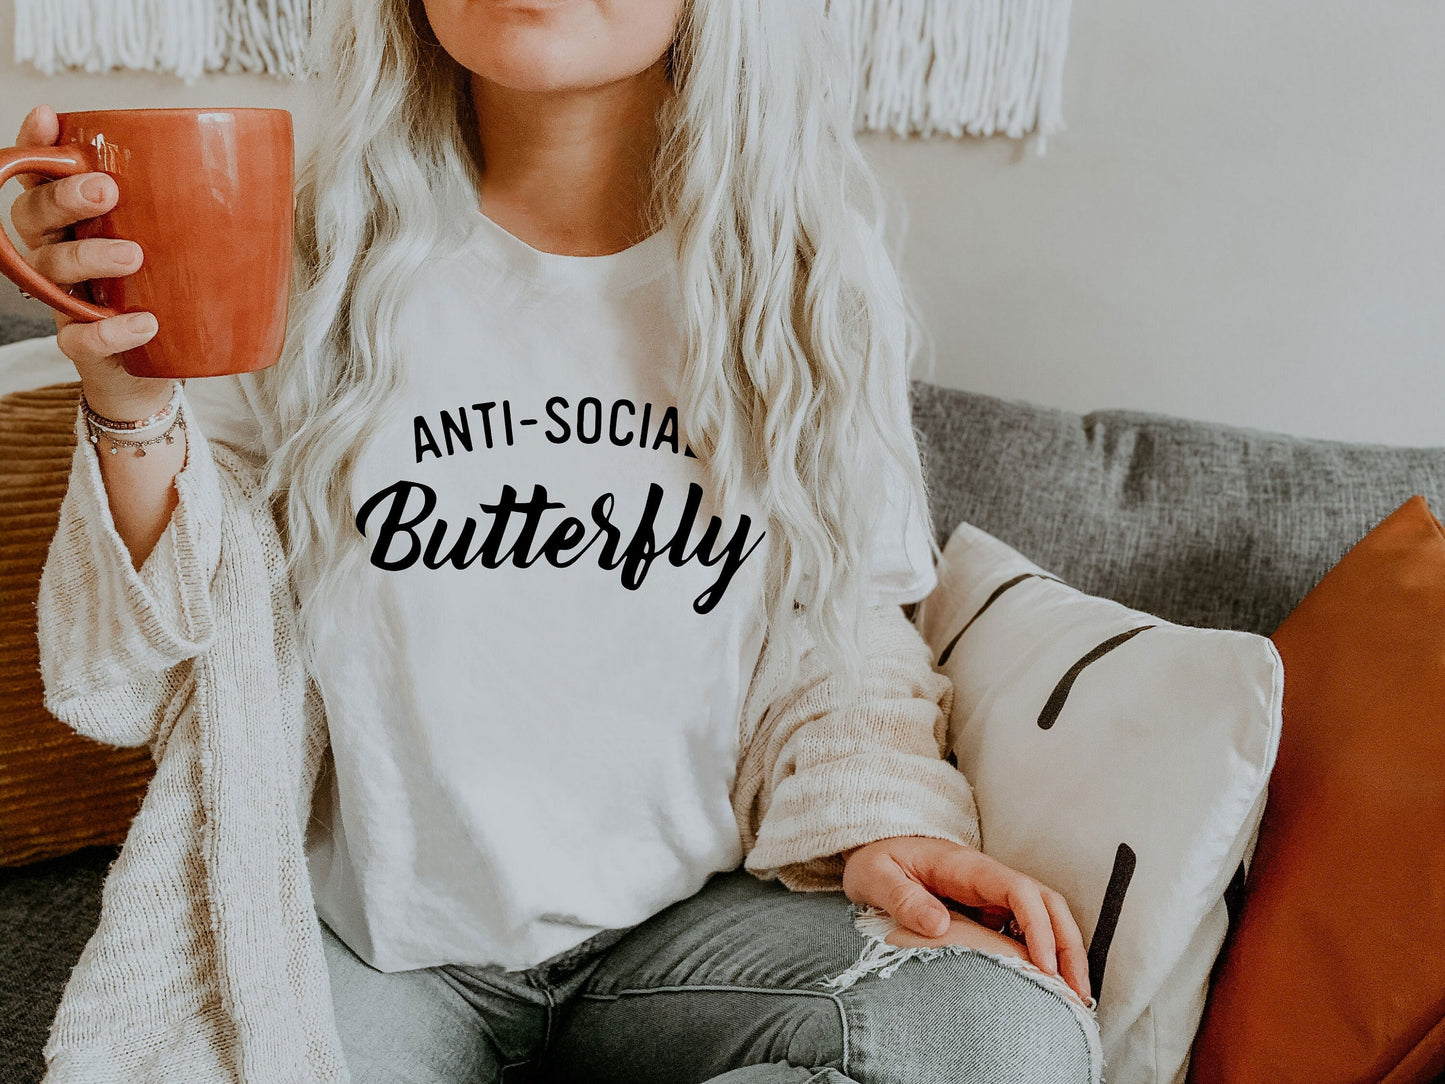 Anti-Social Butterfly Funny Sarcastic Ultra Soft Graphic Tee Unisex Soft Tee T-shirt for Women or Men